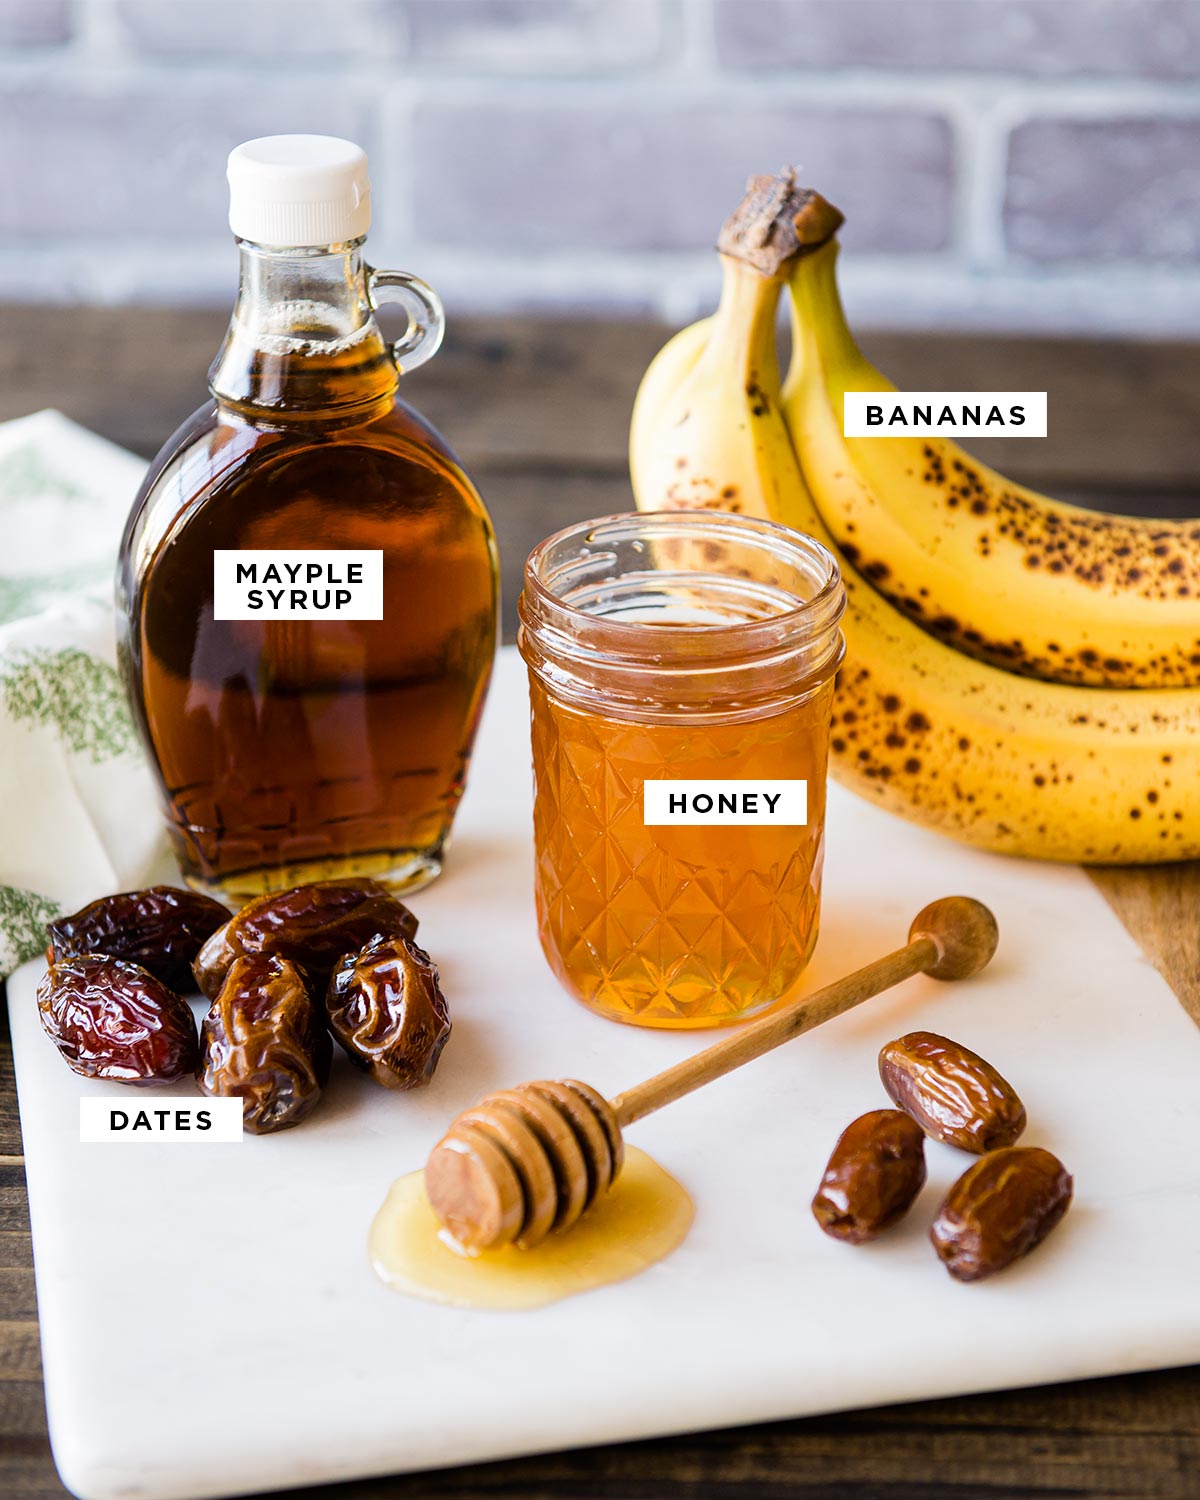 top 4 healthy sugar alternatives labeled: bananas, honey, maple syrup and dates.